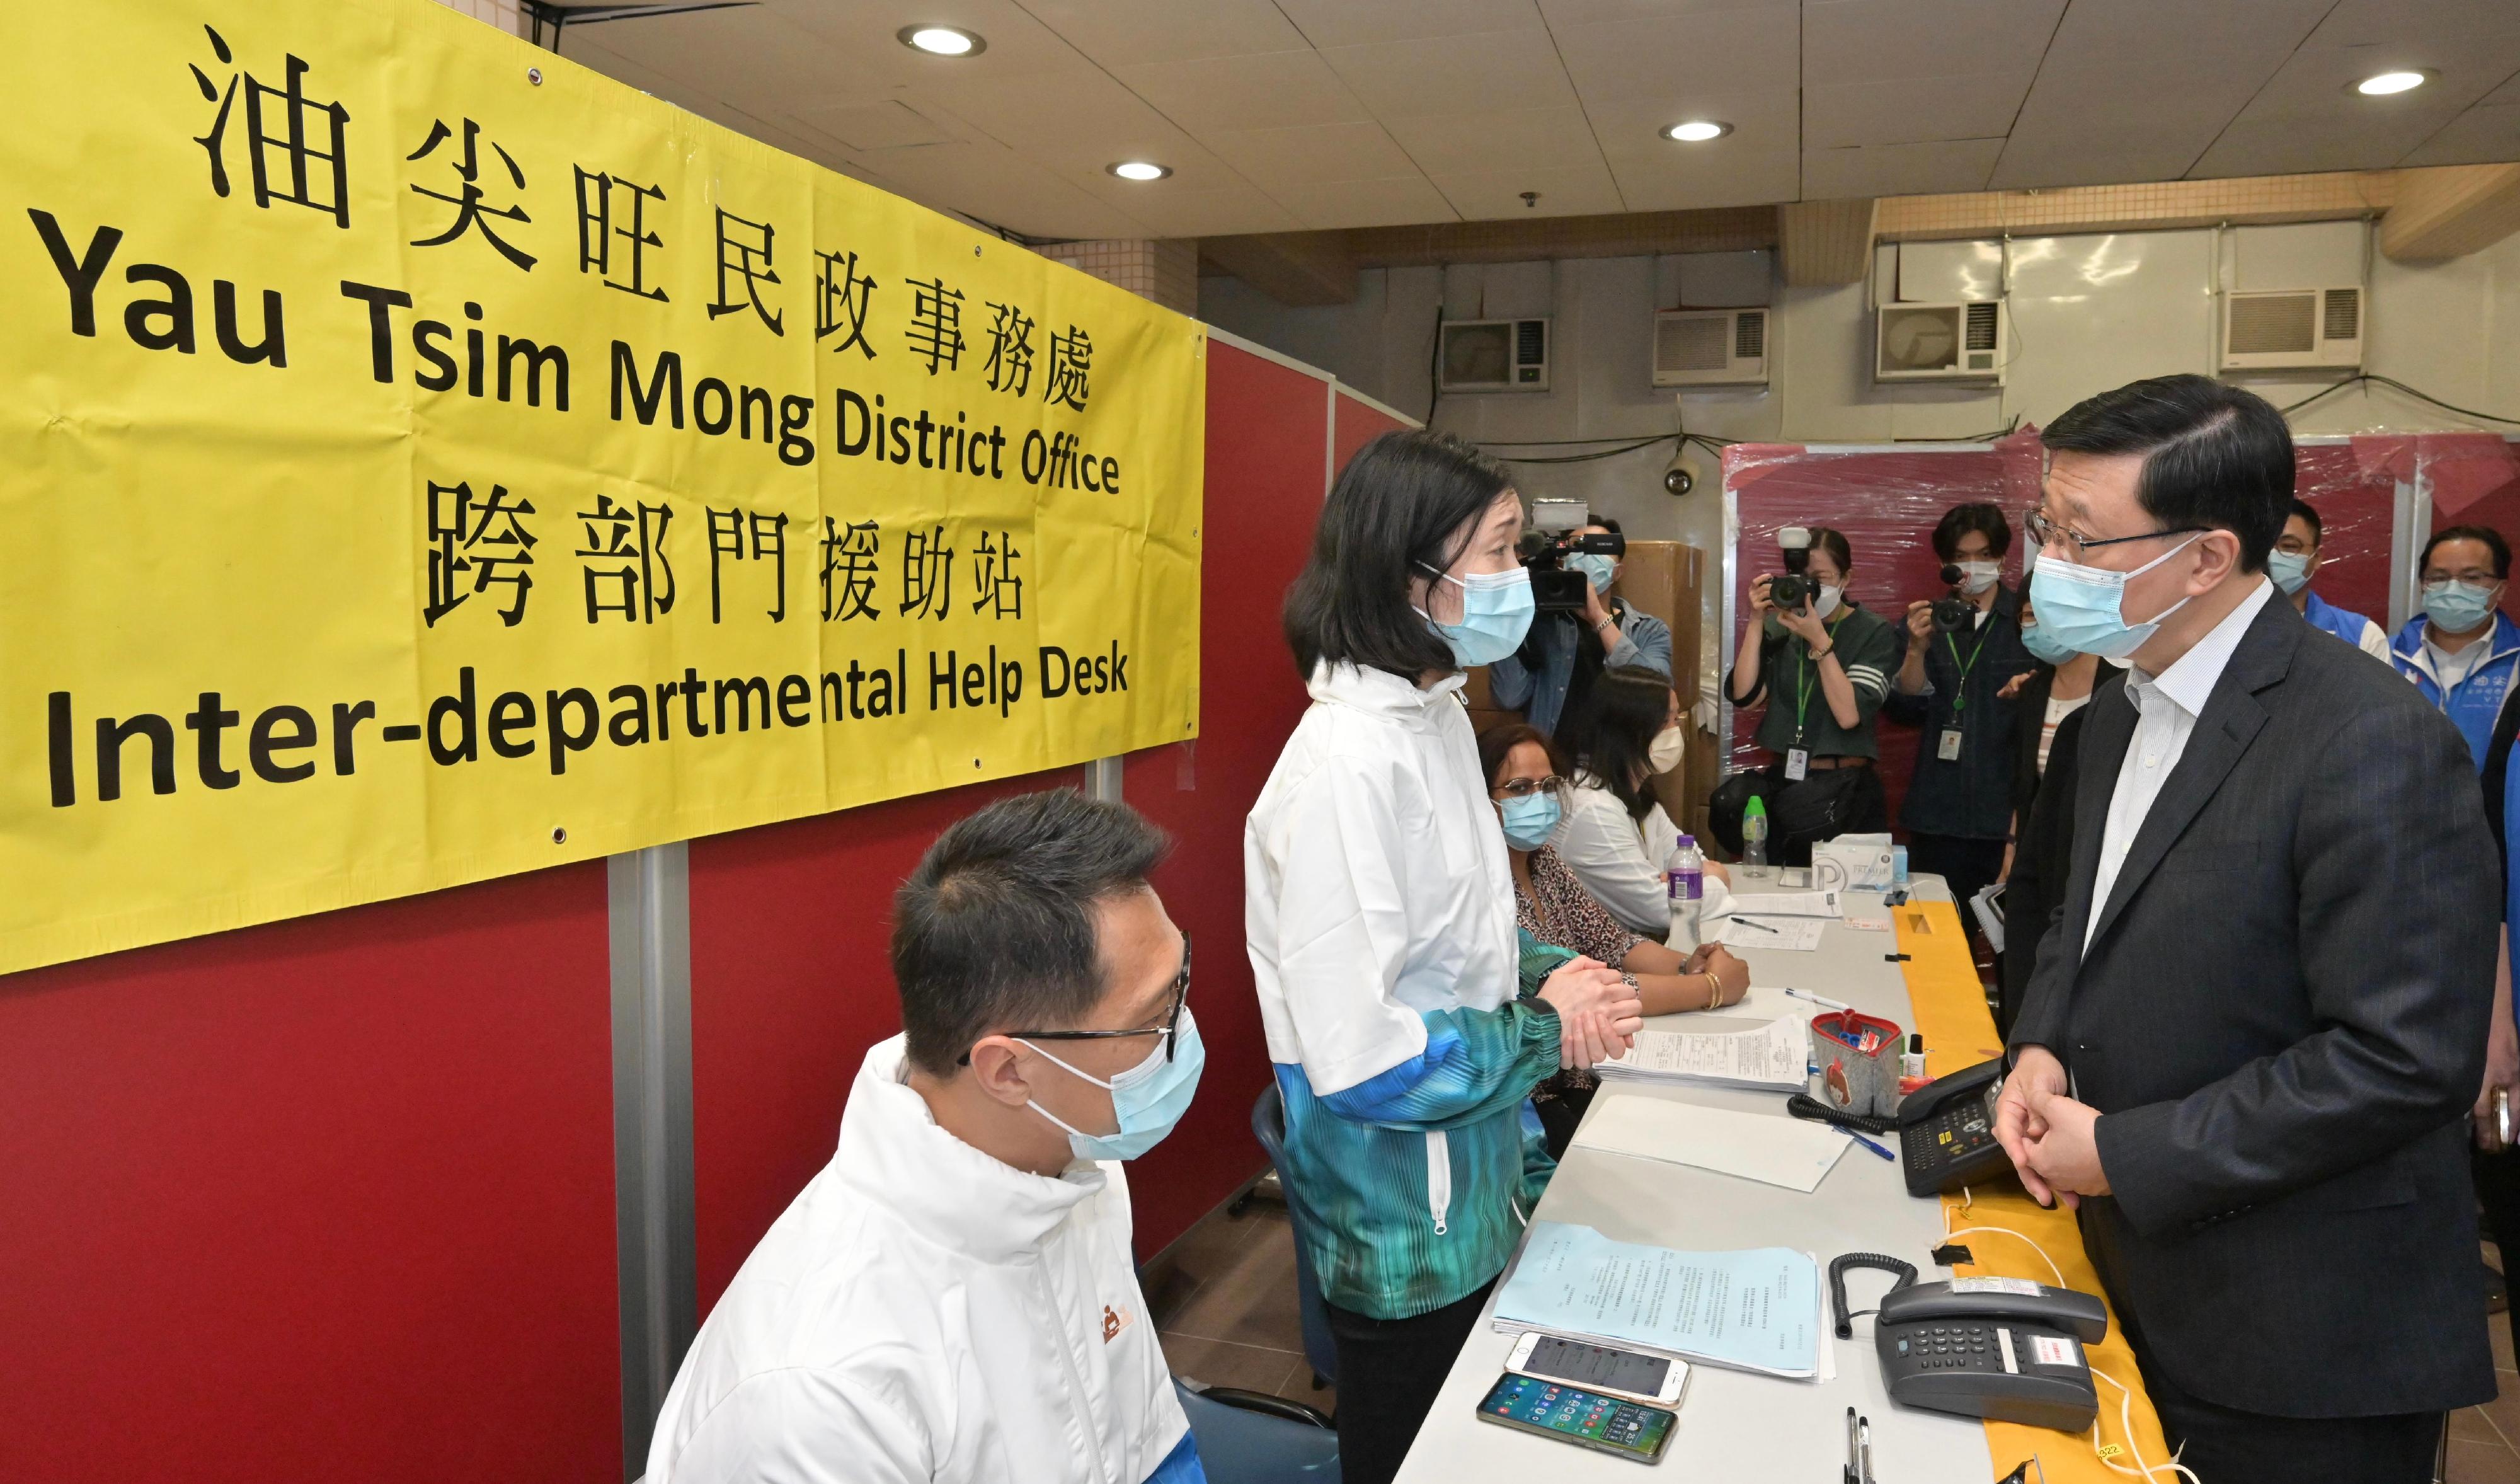 The Chief Executive, Mr John Lee, went to Queen Elizabeth Hospital today (April 10) to visit the injured persons of the No. 3 alarm fire at New Lucky House in Jordan. Photo shows Mr Lee (first right) visiting the interdepartmental help desk in the hospital.